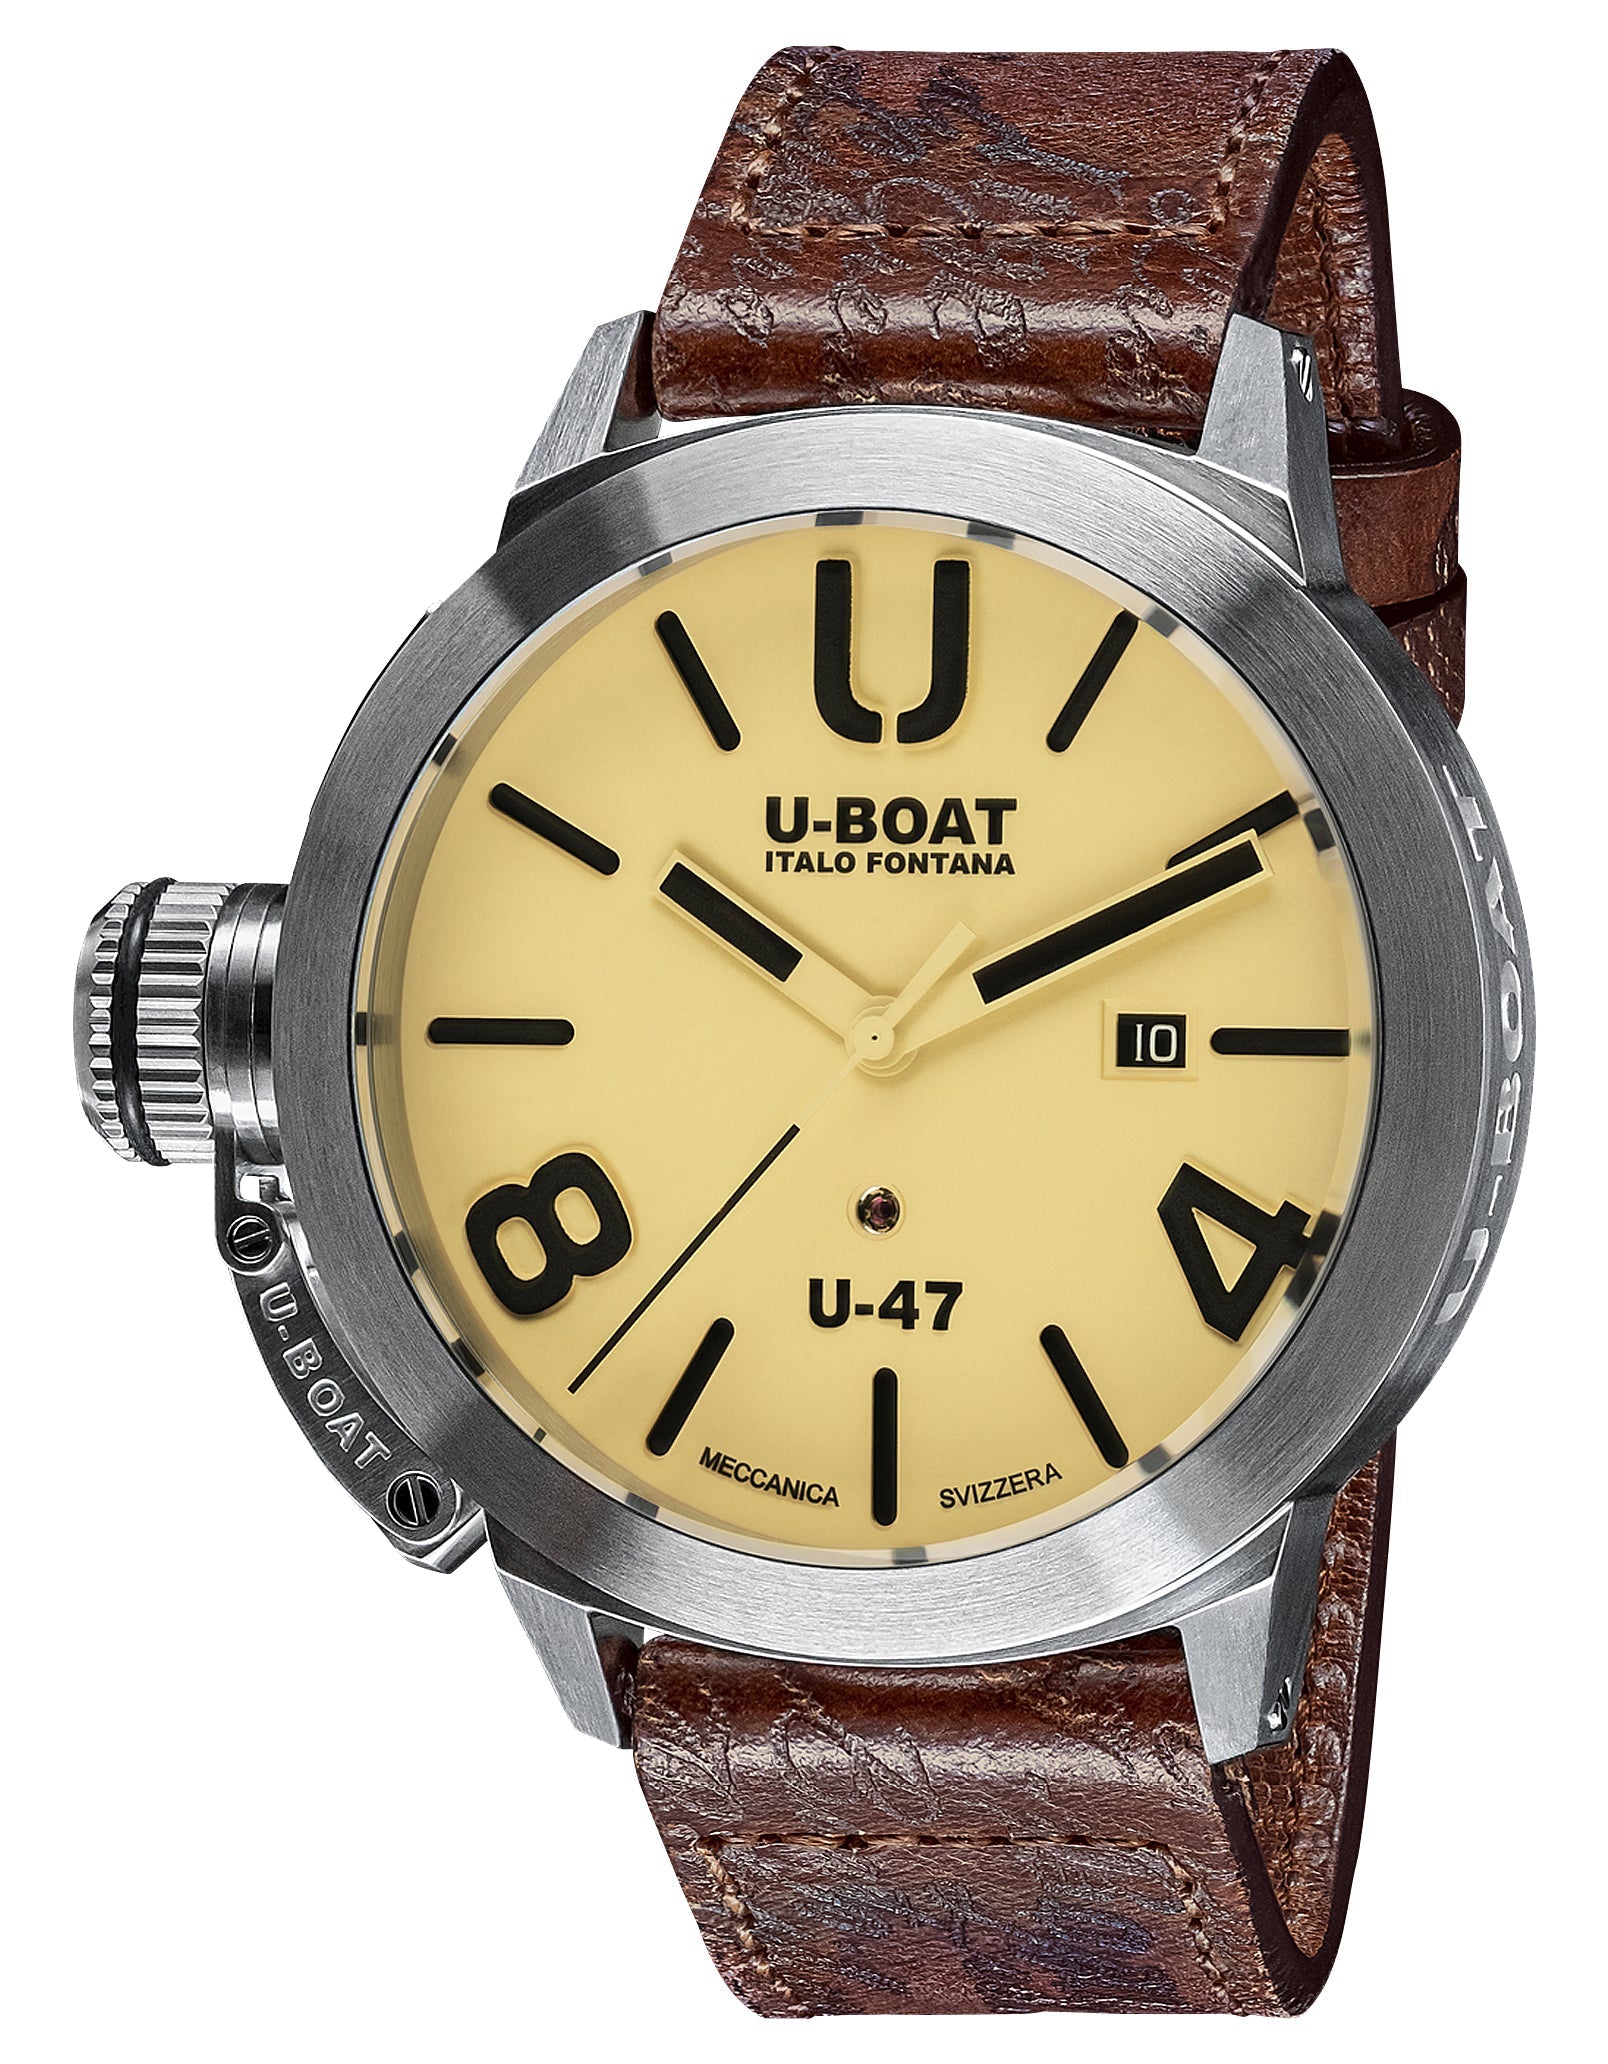 update alt-text with template Watches - Mens-U-Boat-8106-45 - 50 mm, beige, Classico U-47, date, leather, mens, menswatches, new arrivals, round, rpSKU_7797, rpSKU_8105, rpSKU_8898, rpSKU_8899, rpSKU_8900, stainless steel case, swiss automatic, U-Boat, watches-Watches & Beyond